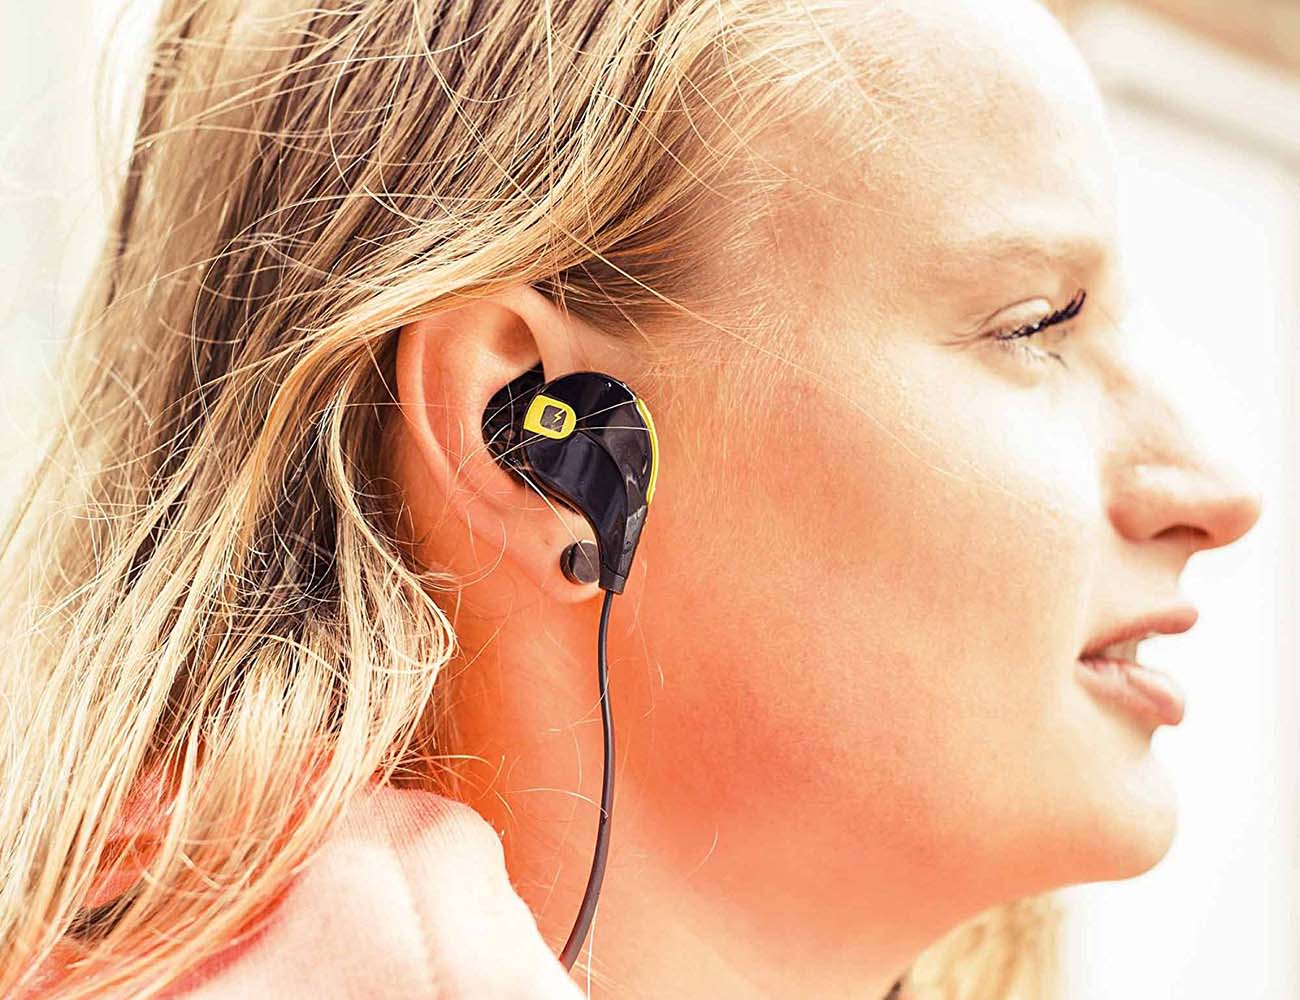 MMOVE Bluetooth Earbuds